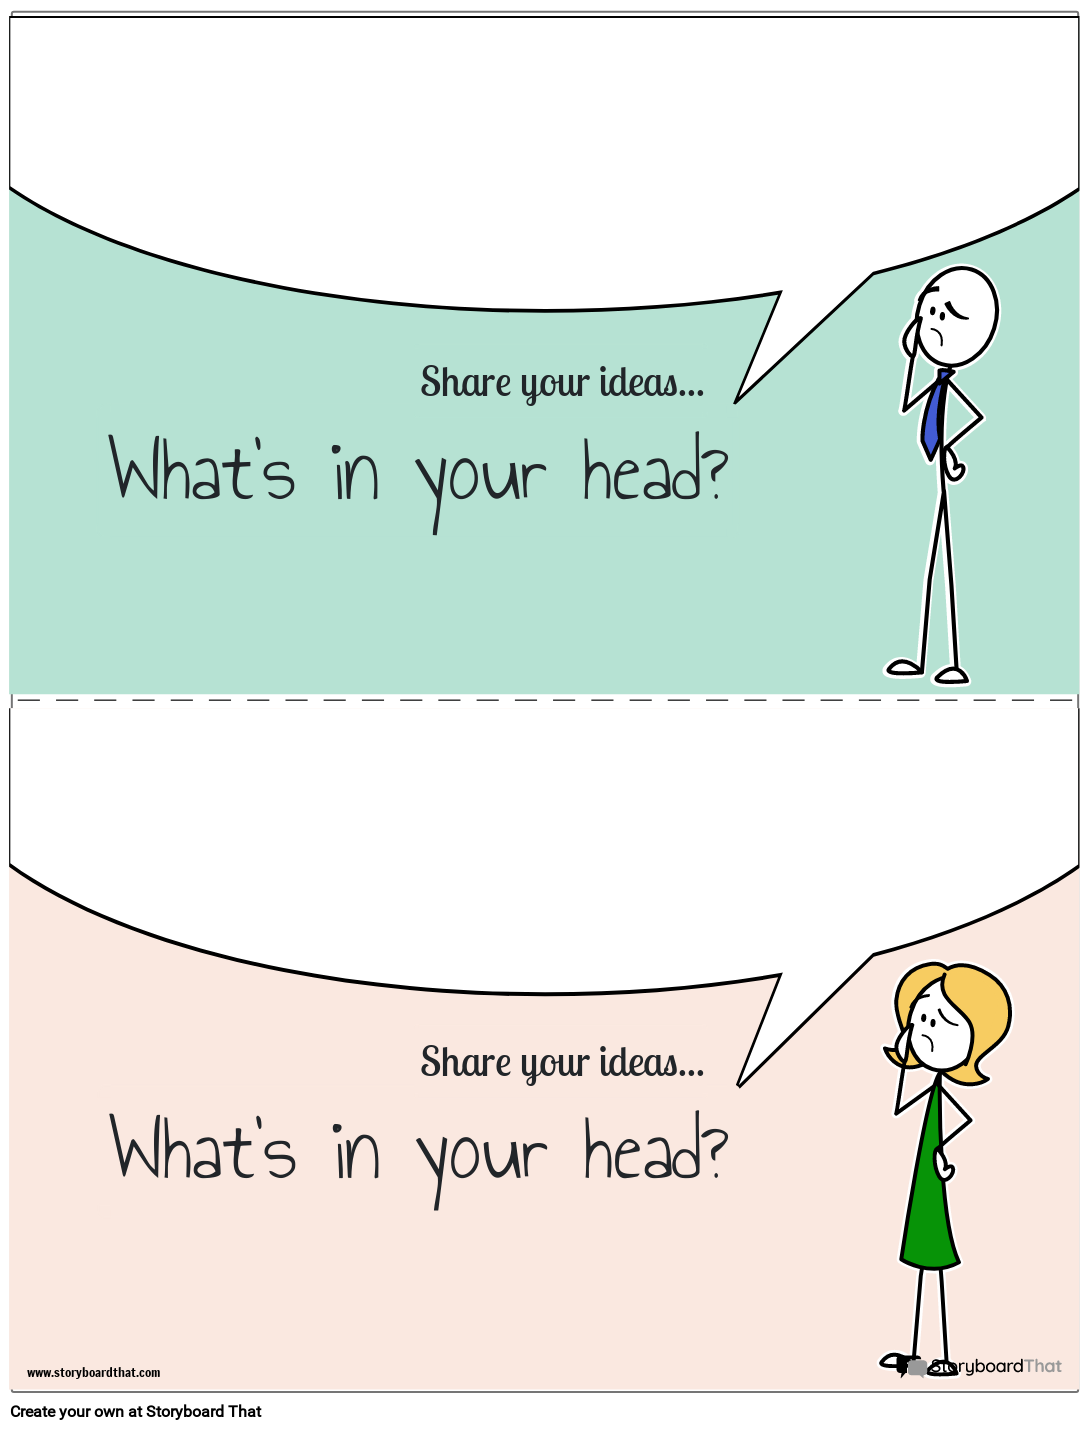 What's in your head Suggestion